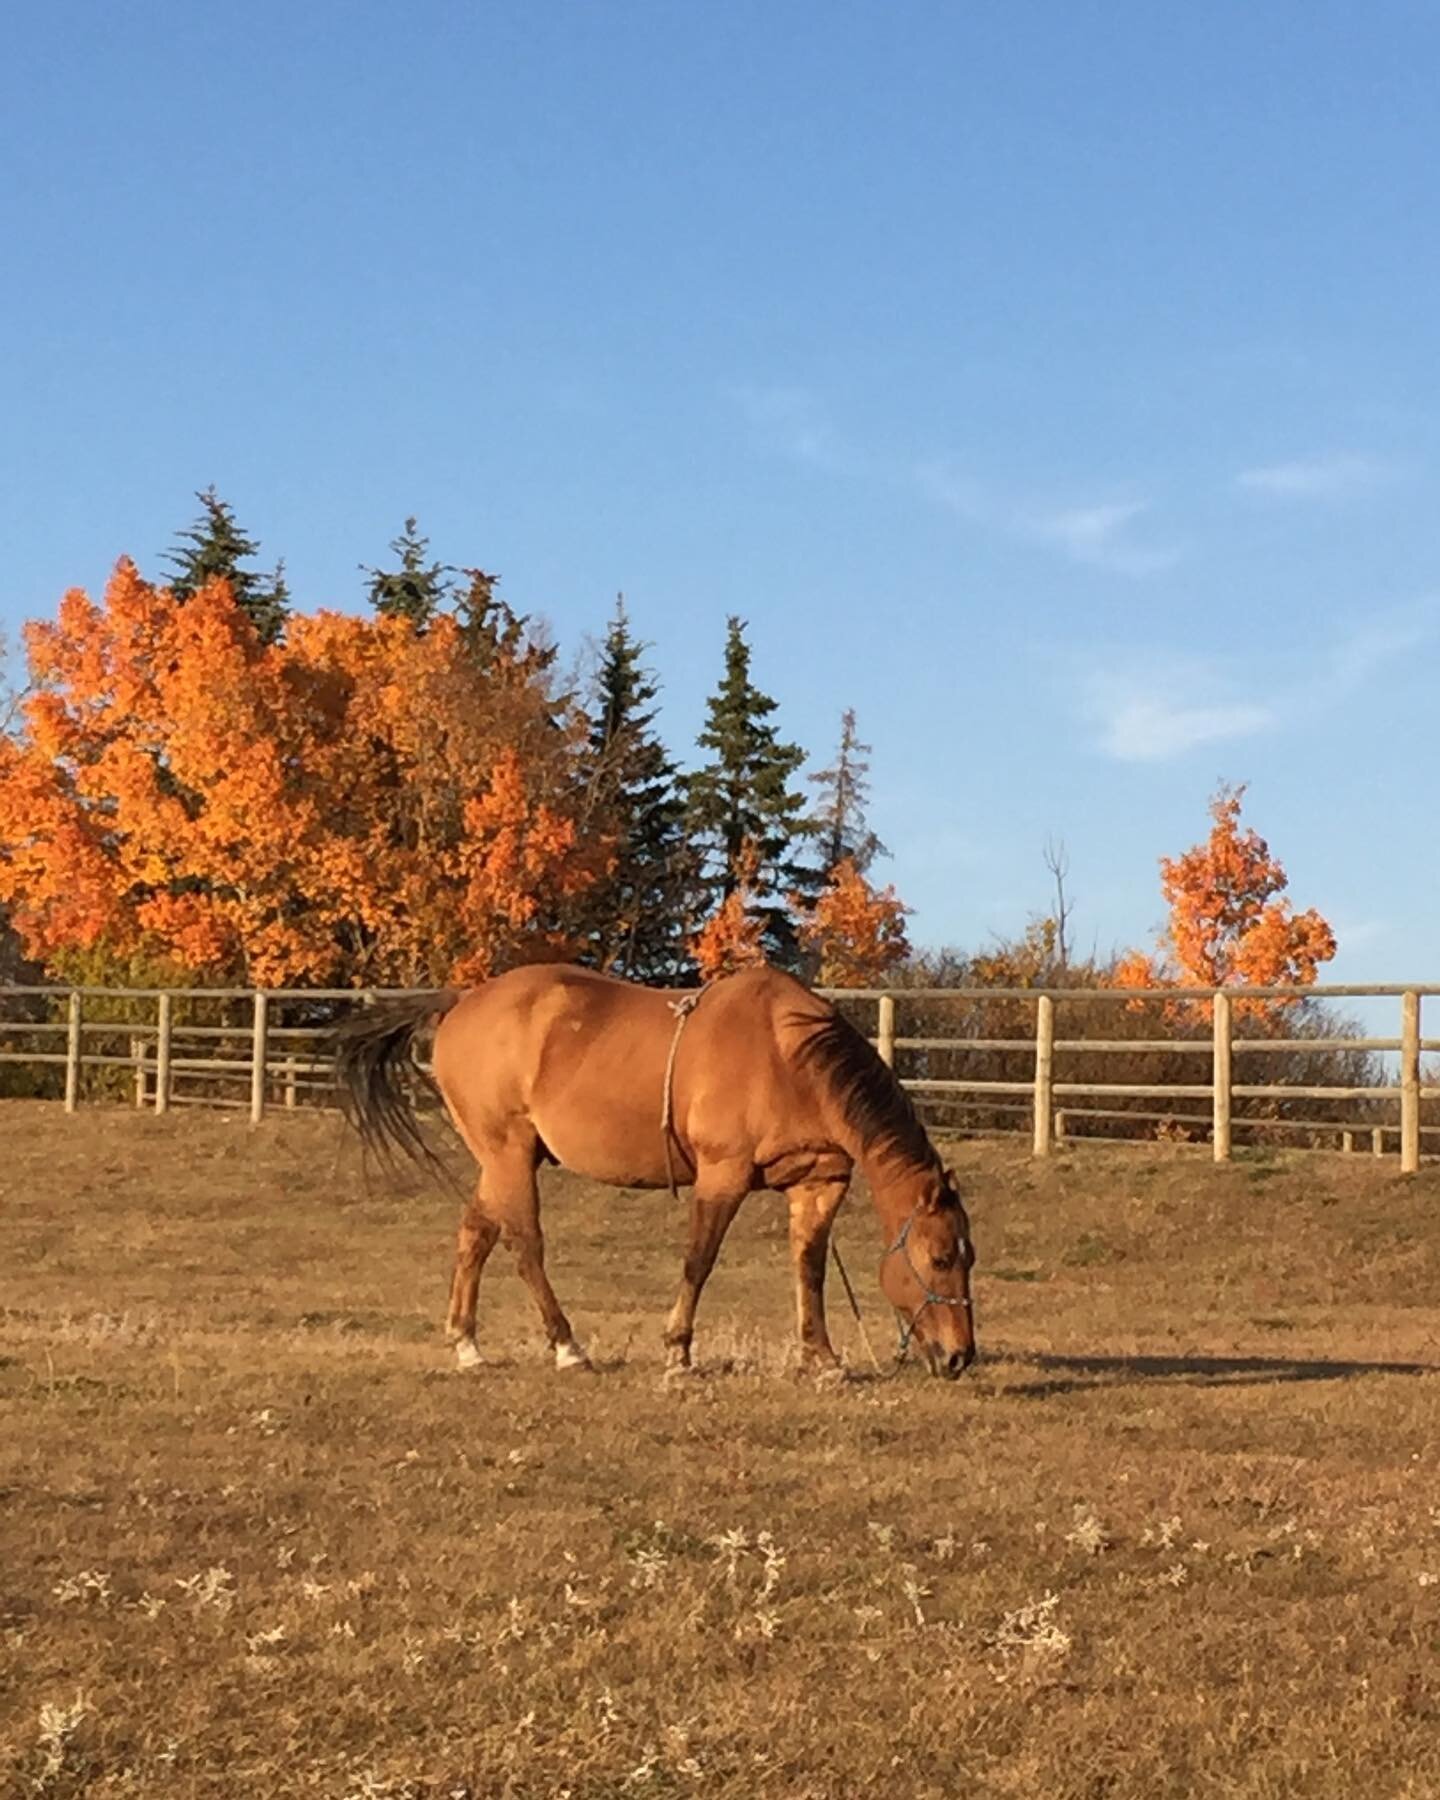 Enjoying the last few days of warm autumn weather and the last bites of grass.